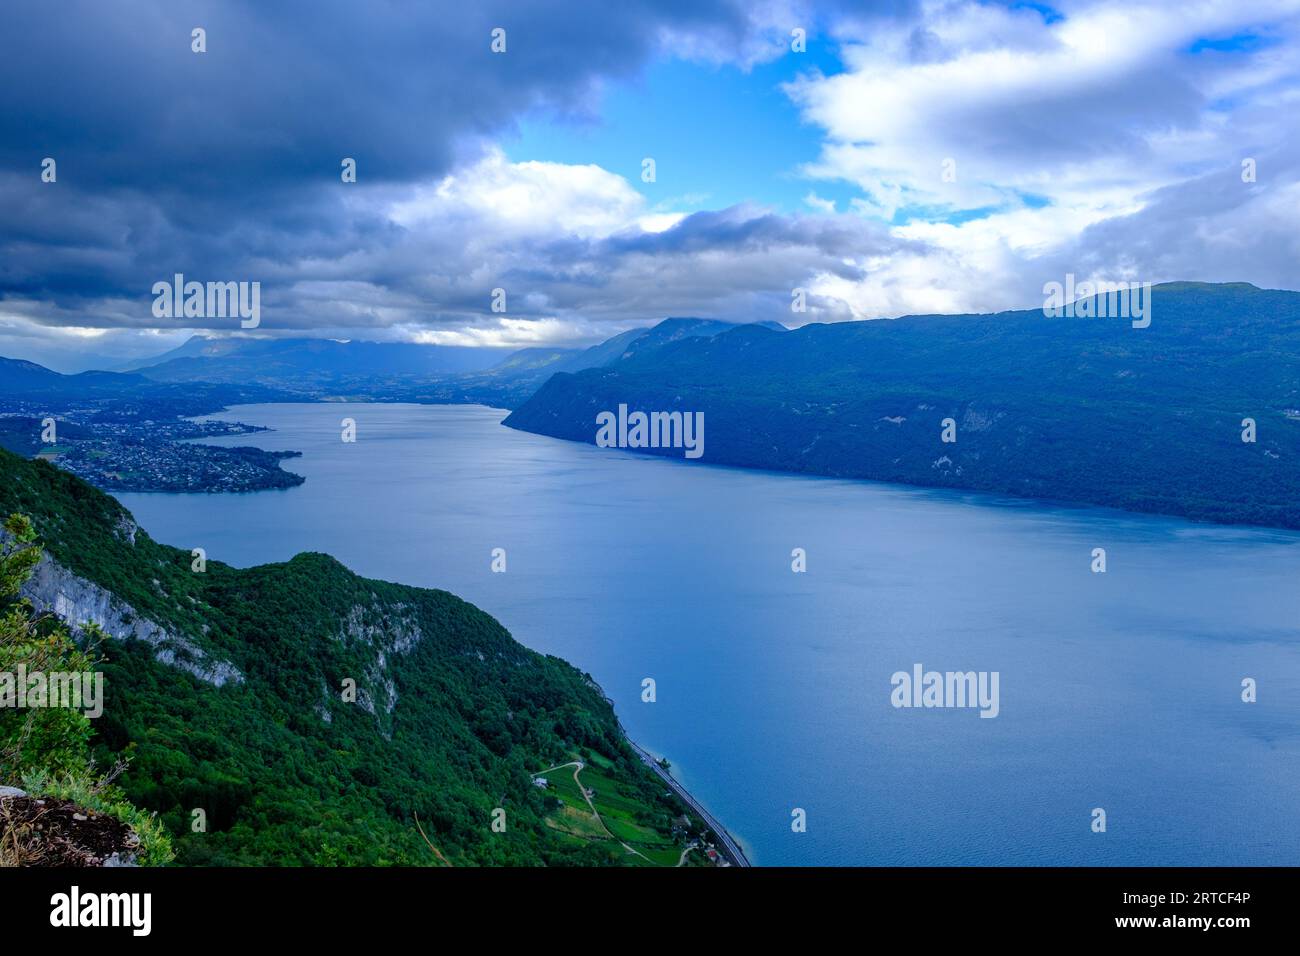 The Bourget lake from an elevated viewpoint Stock Photo